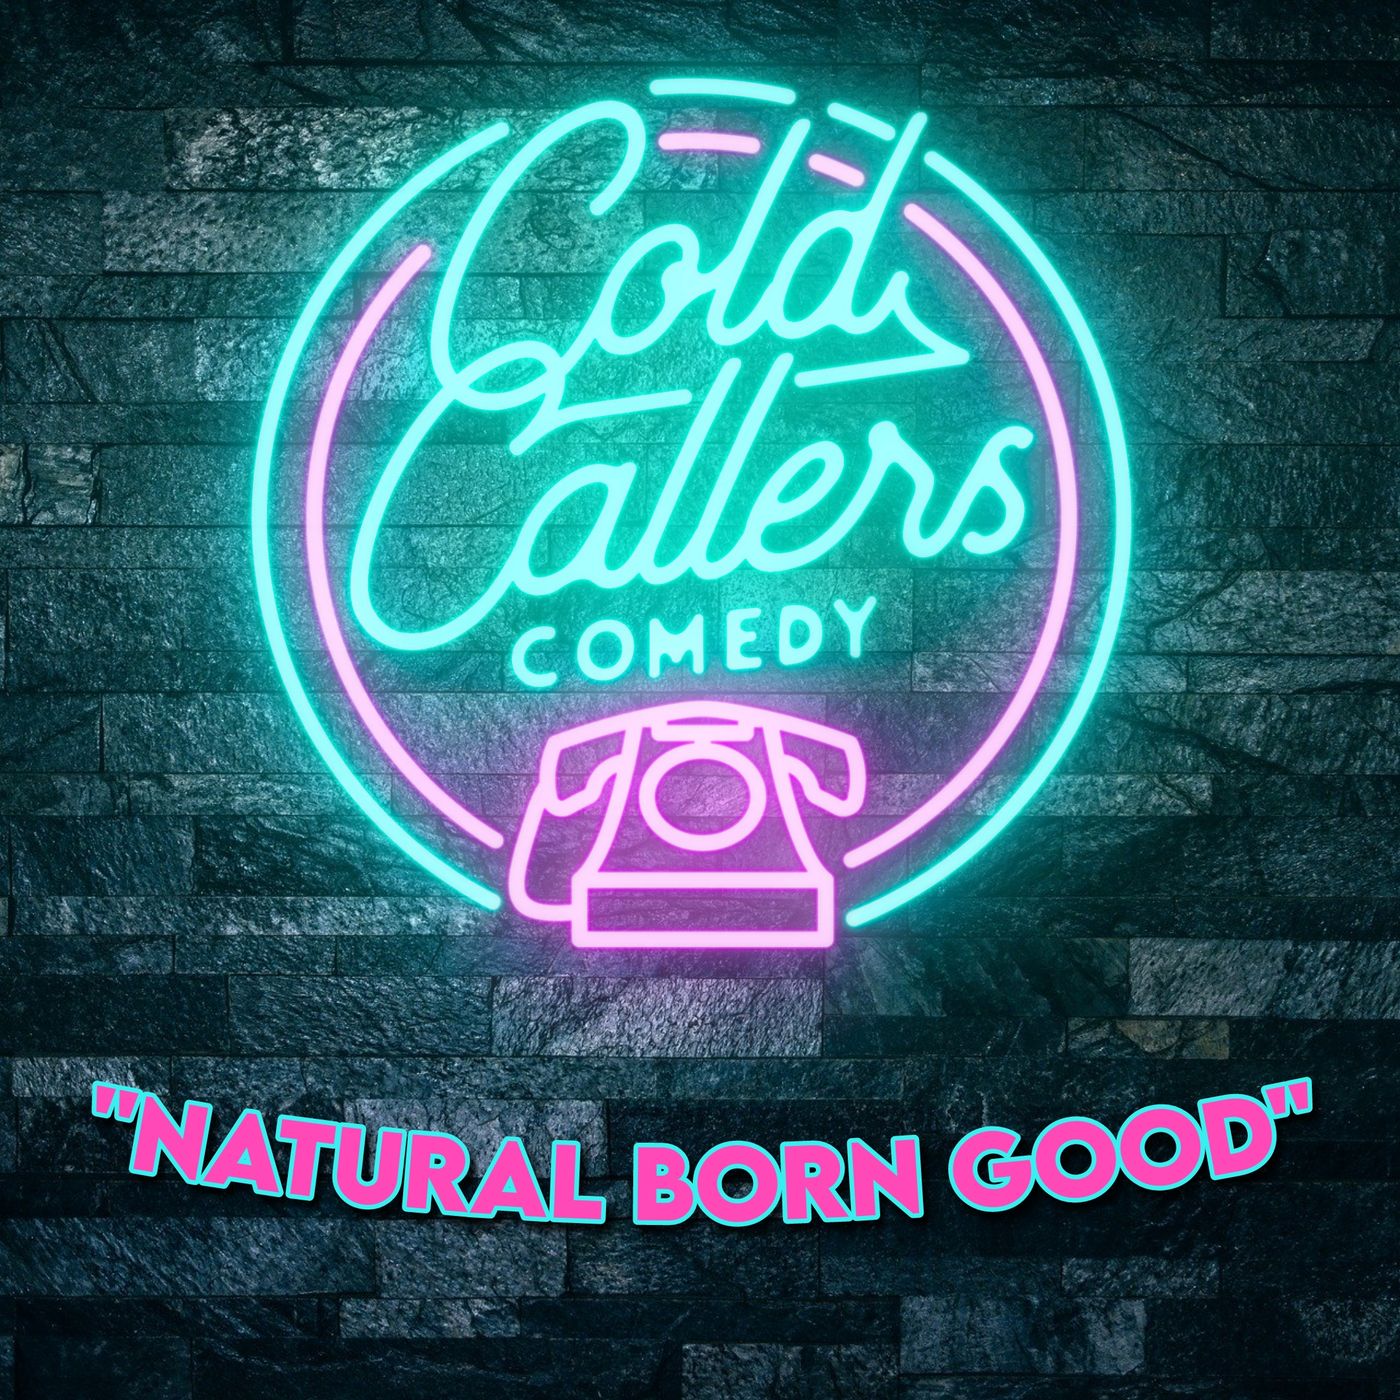 ”Natural Born Good” by Cold Callers Comedy